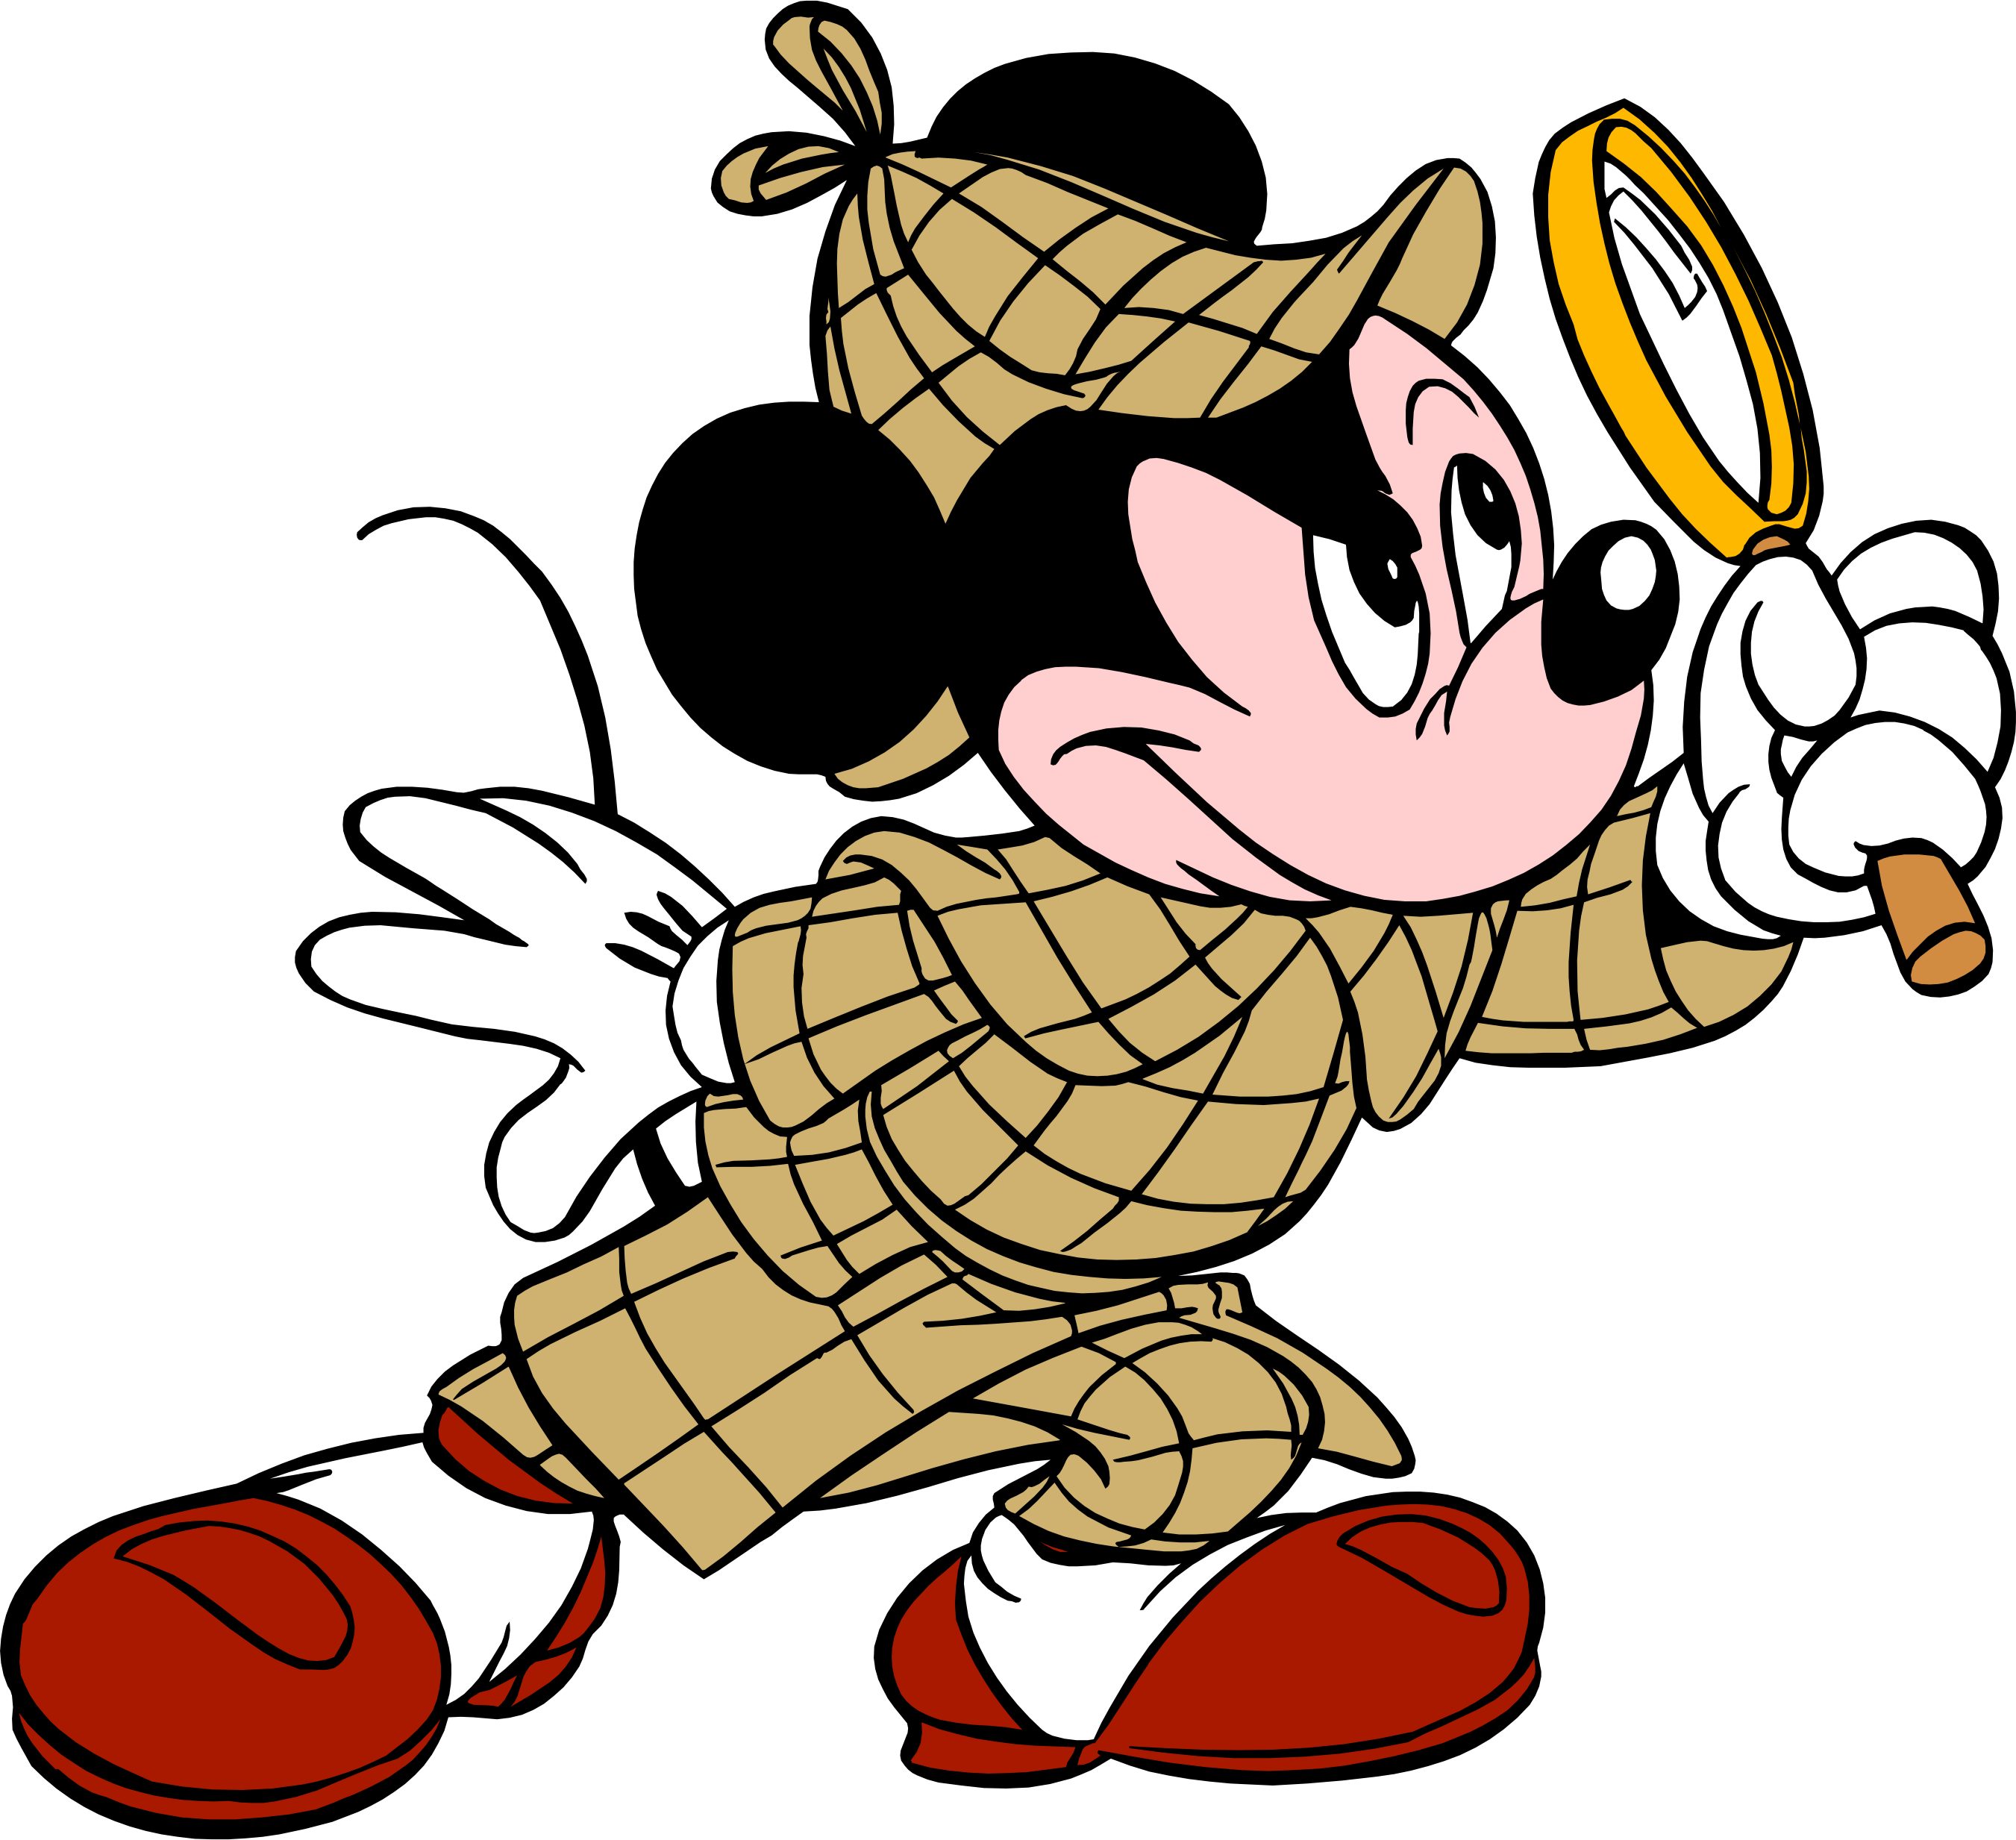 Mickey mouse in png. Detective clipart webquest